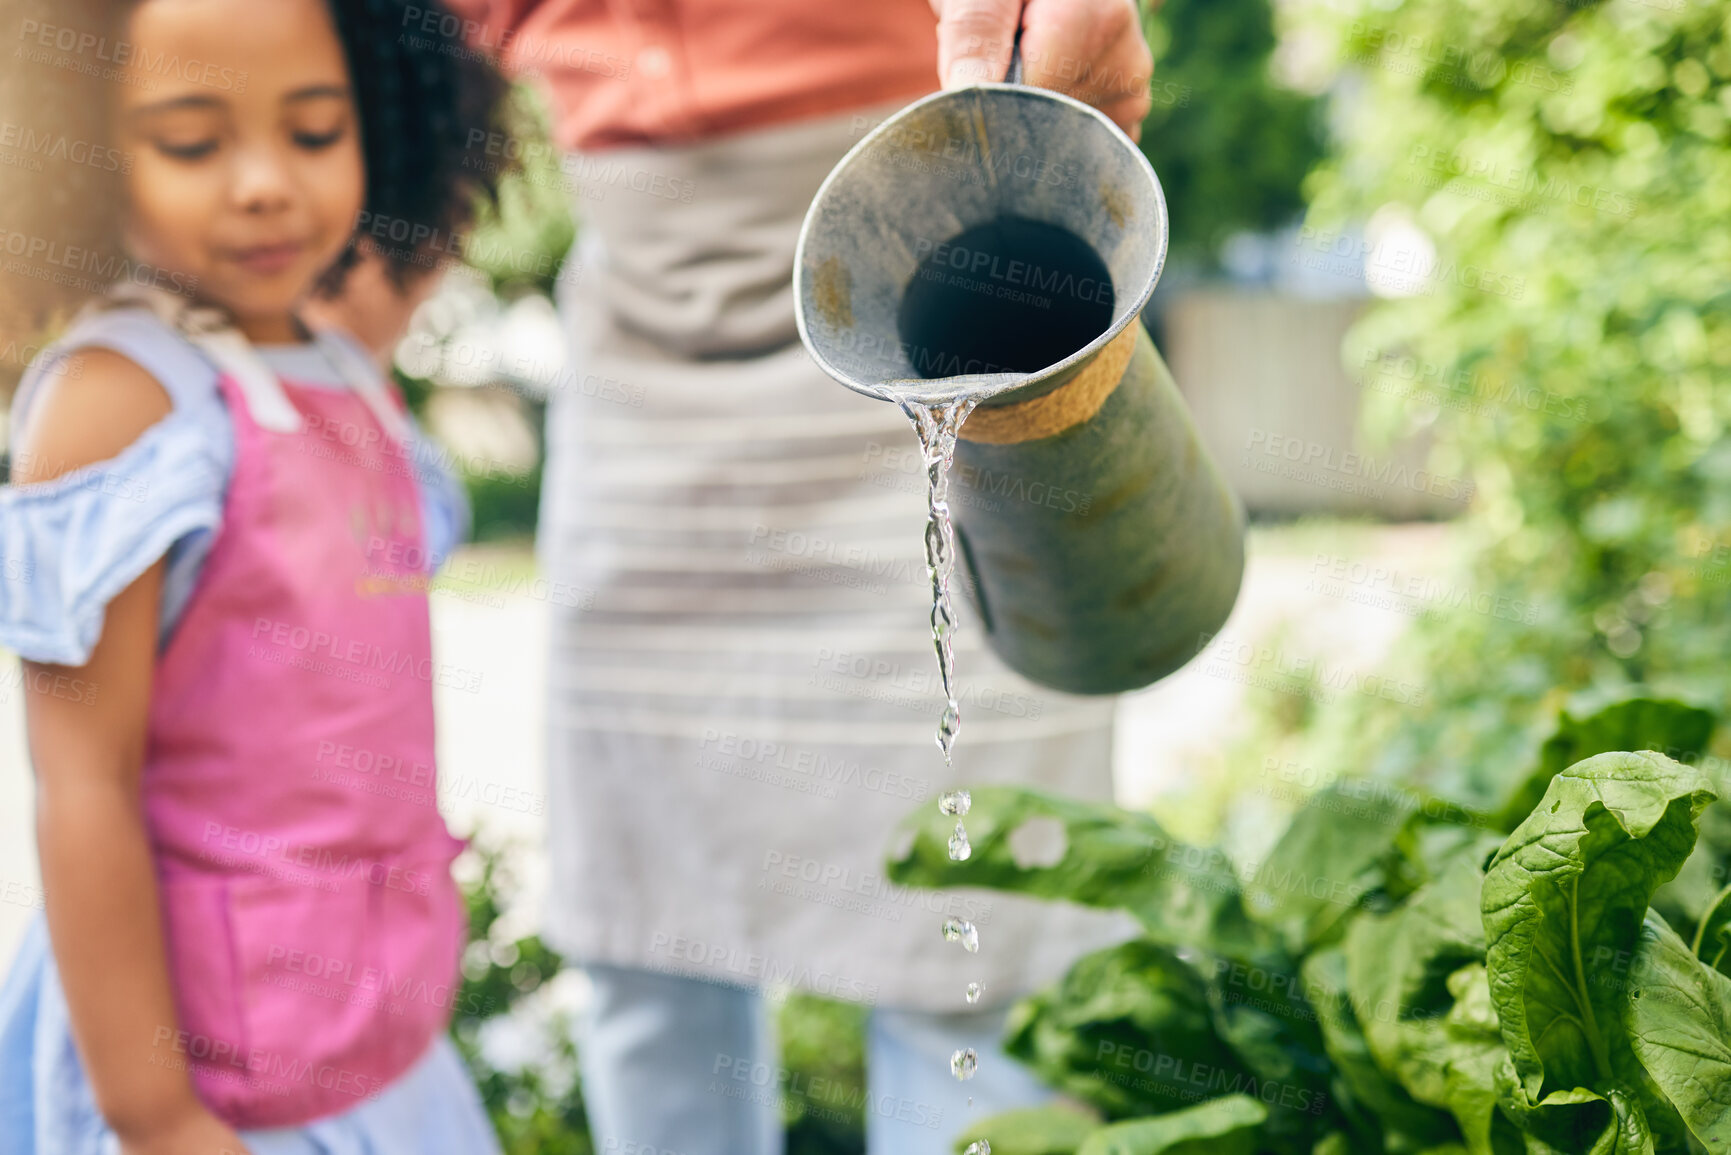 Buy stock photo Gardening, dad and child water plants, teaching and learning with growth in nature together. Backyard, sustainability and father helping daughter watering vegetable garden with love, support and fun.